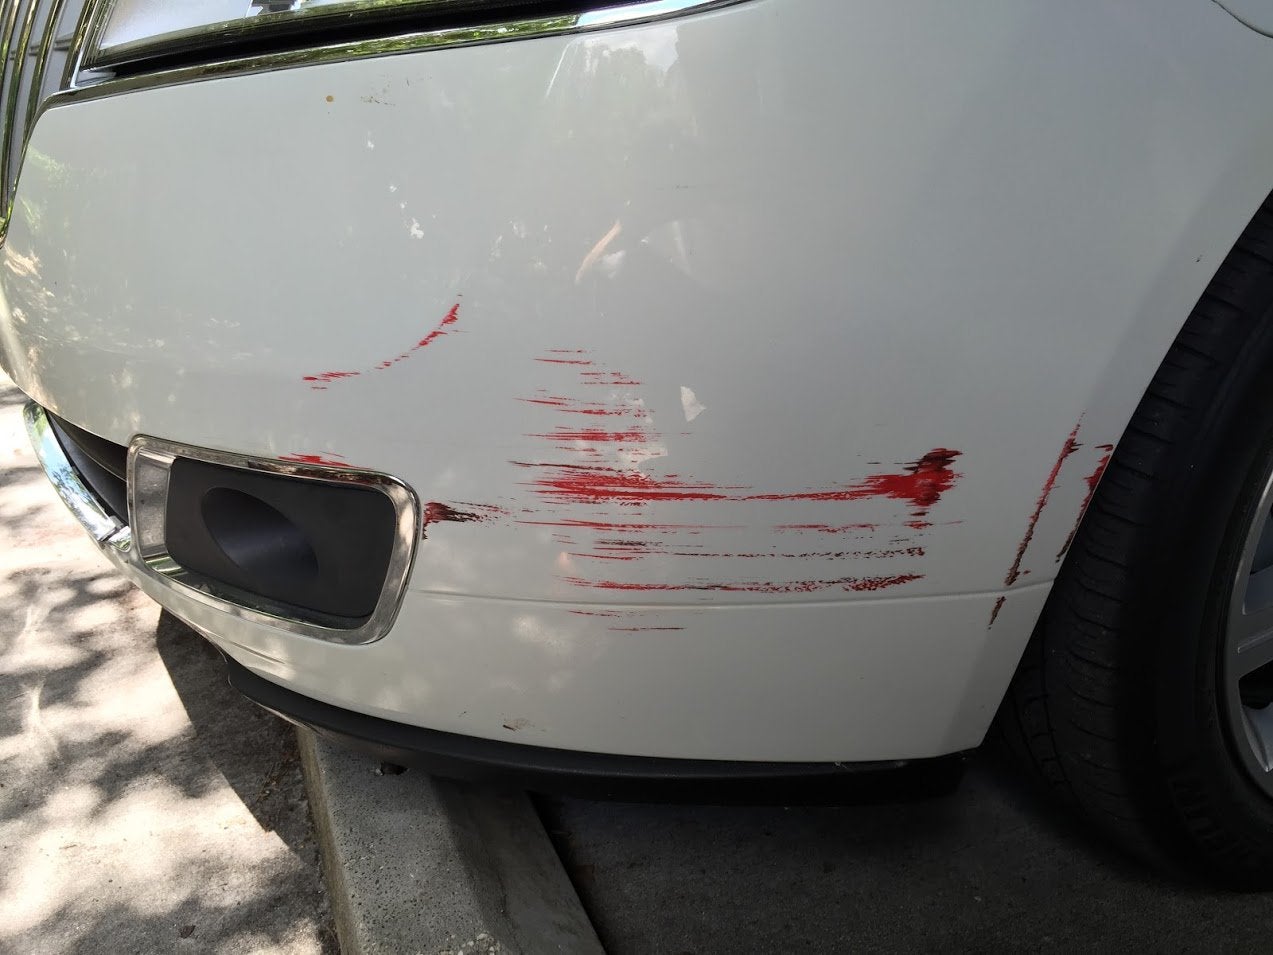 How Does Paint Transfer in a Car Accident?